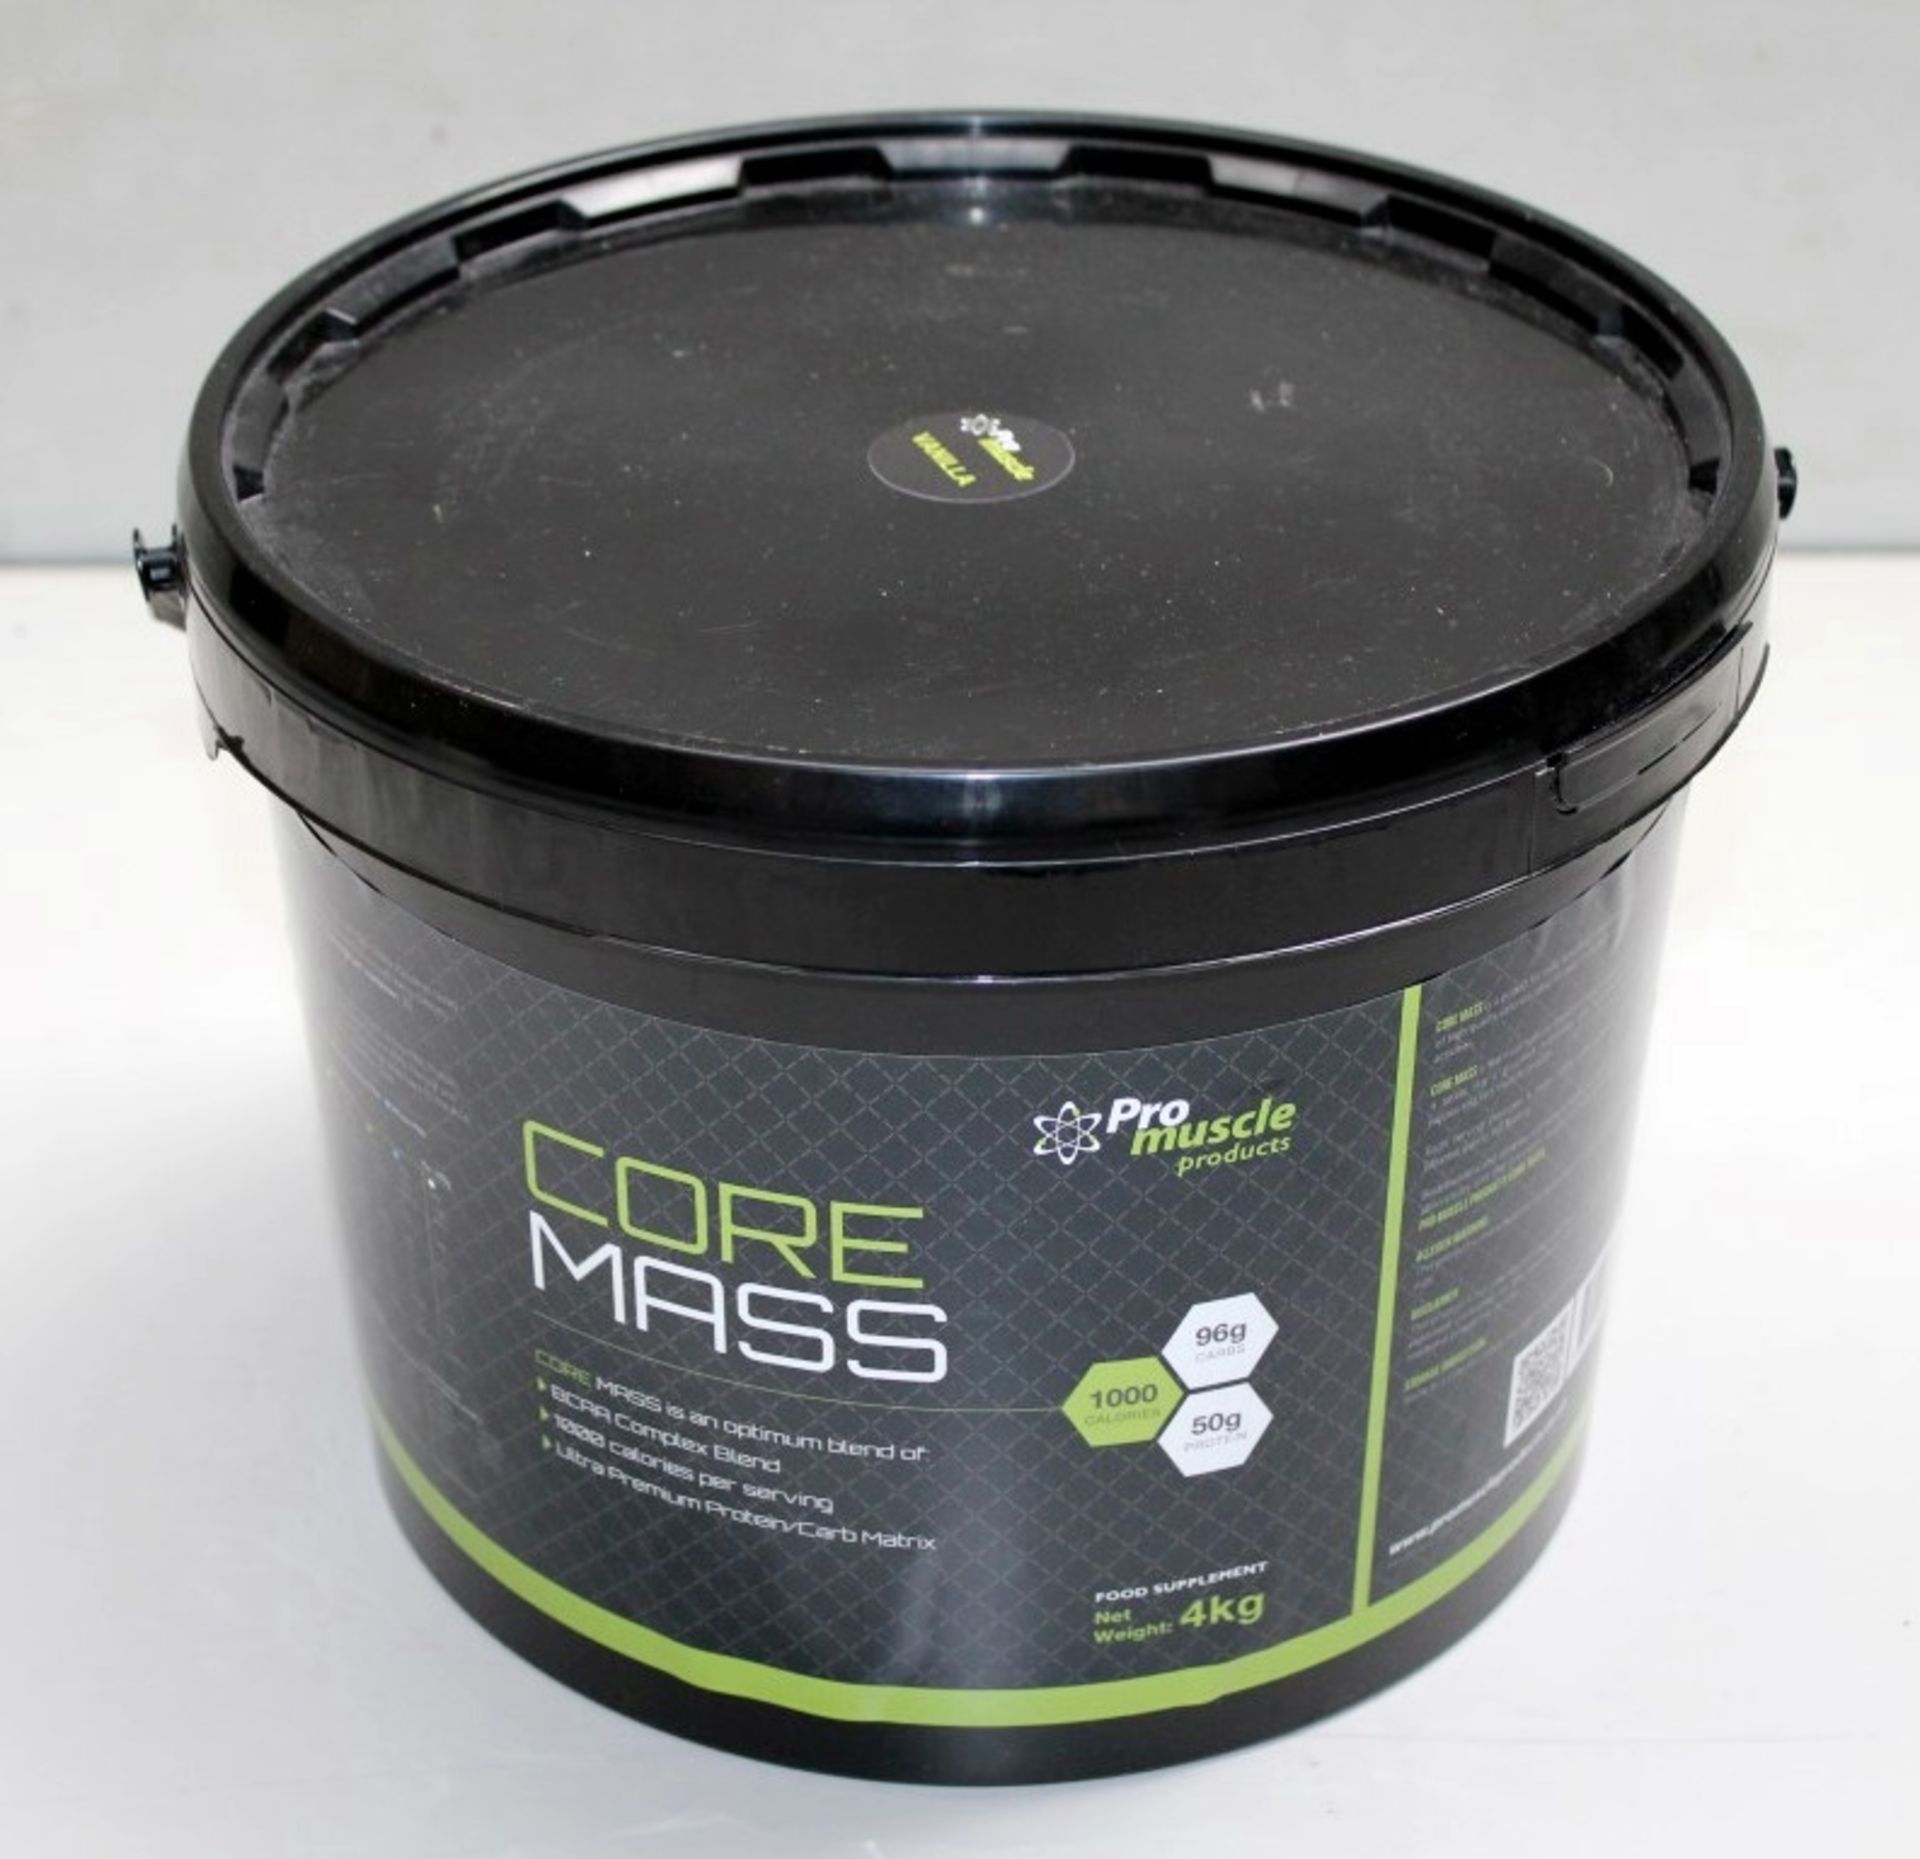 1 x Pro Muscle CORE MASS GAINER Food Supplement (4KG) - Flavour: Vanilla - New Sealed Stock - Best - Image 2 of 4